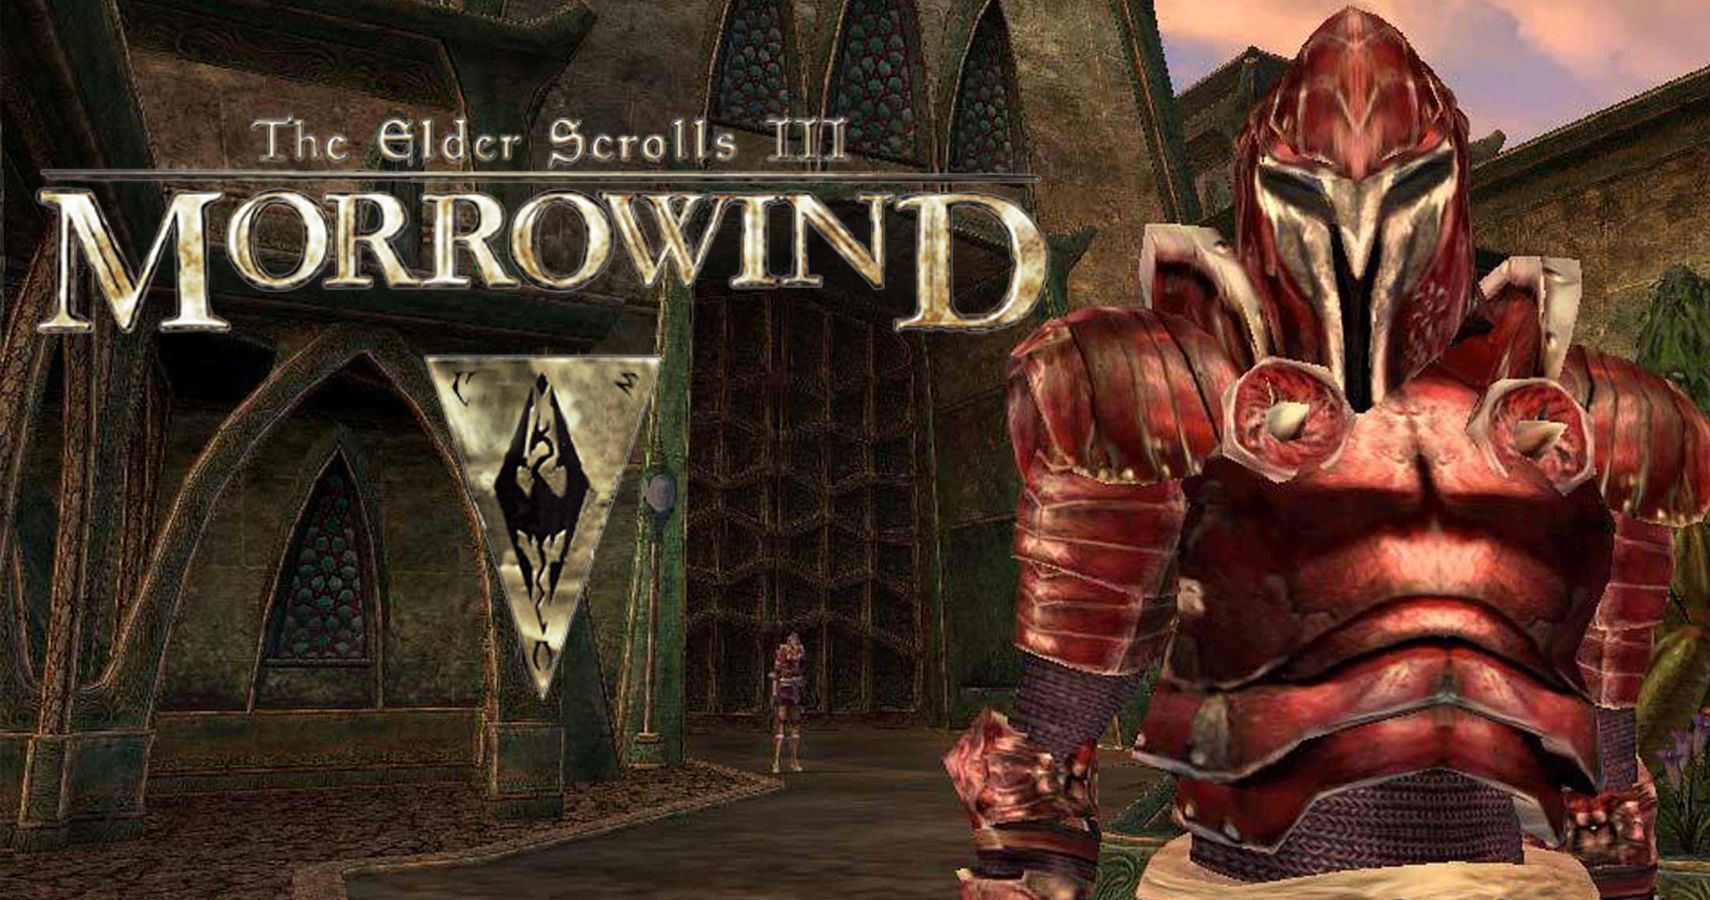 the-elder-scrolls-3-morrowind-is-free-today-only-to-celebrate-25th-anniversary-of-franchise